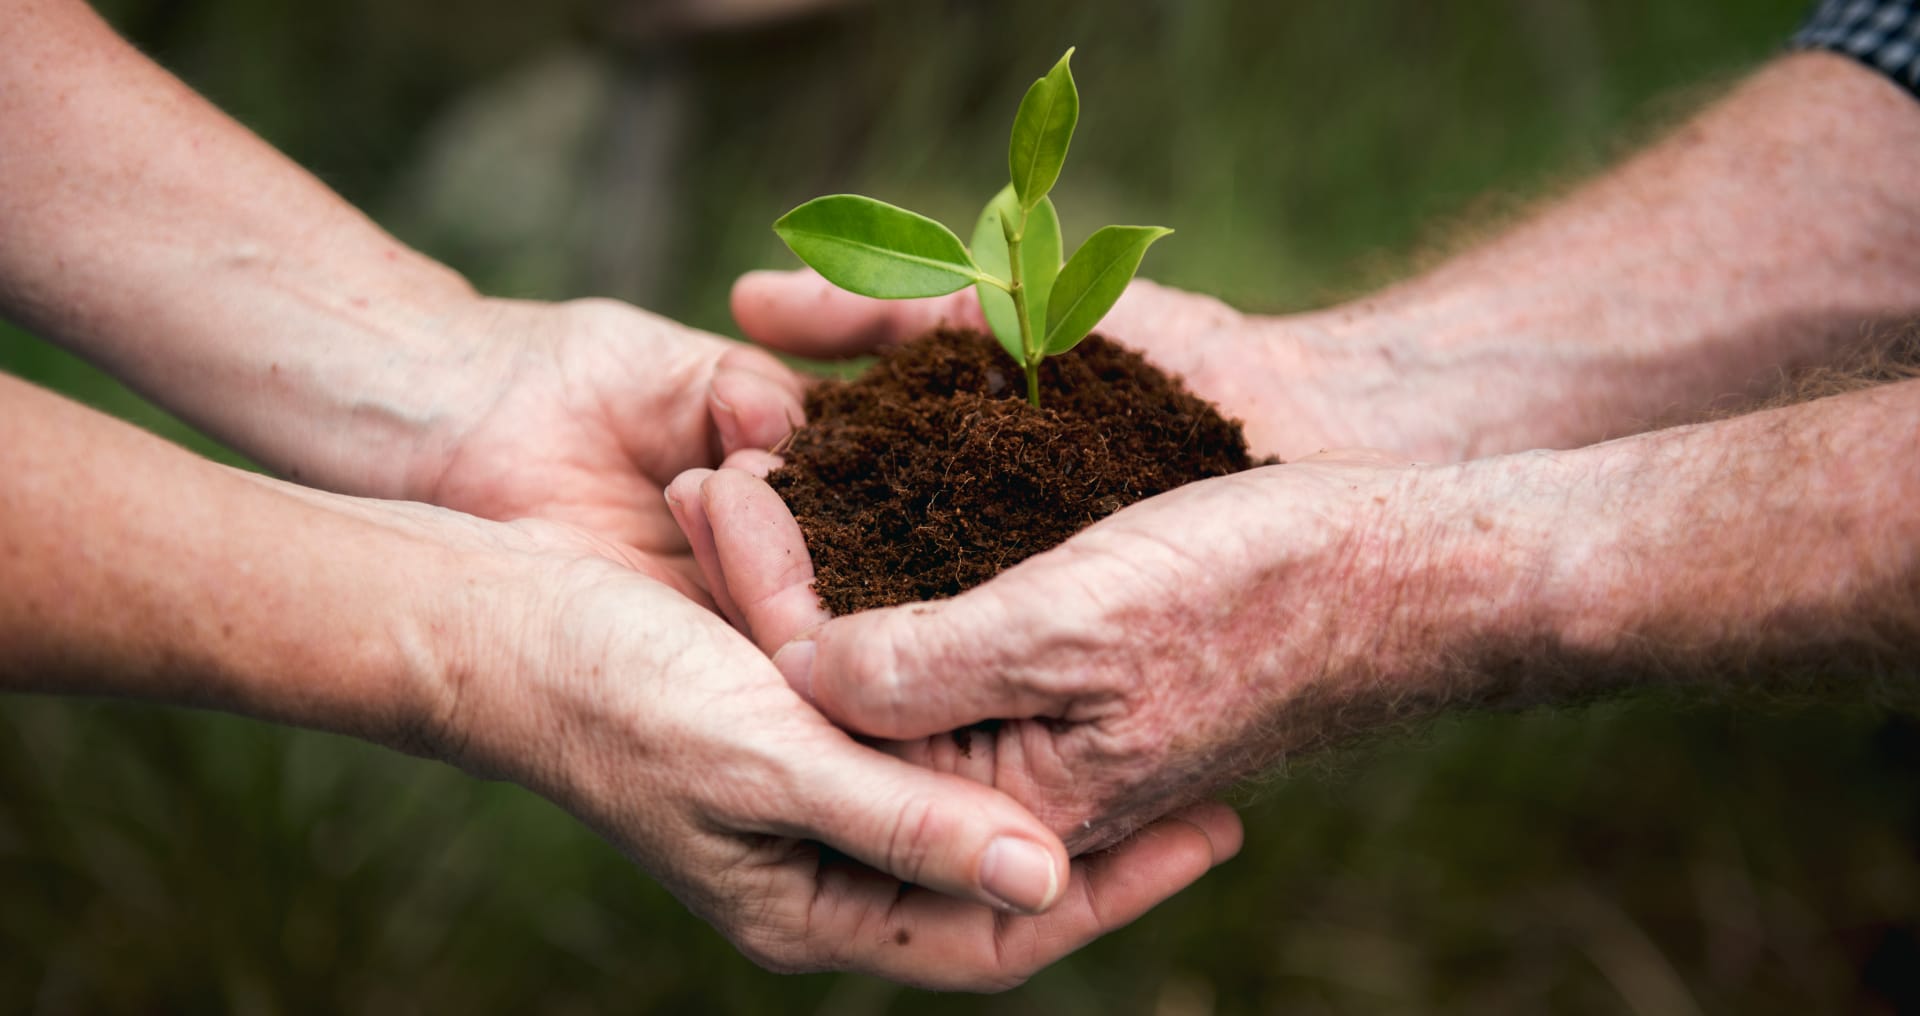 Two pairs of hands holding a sapling with dirt